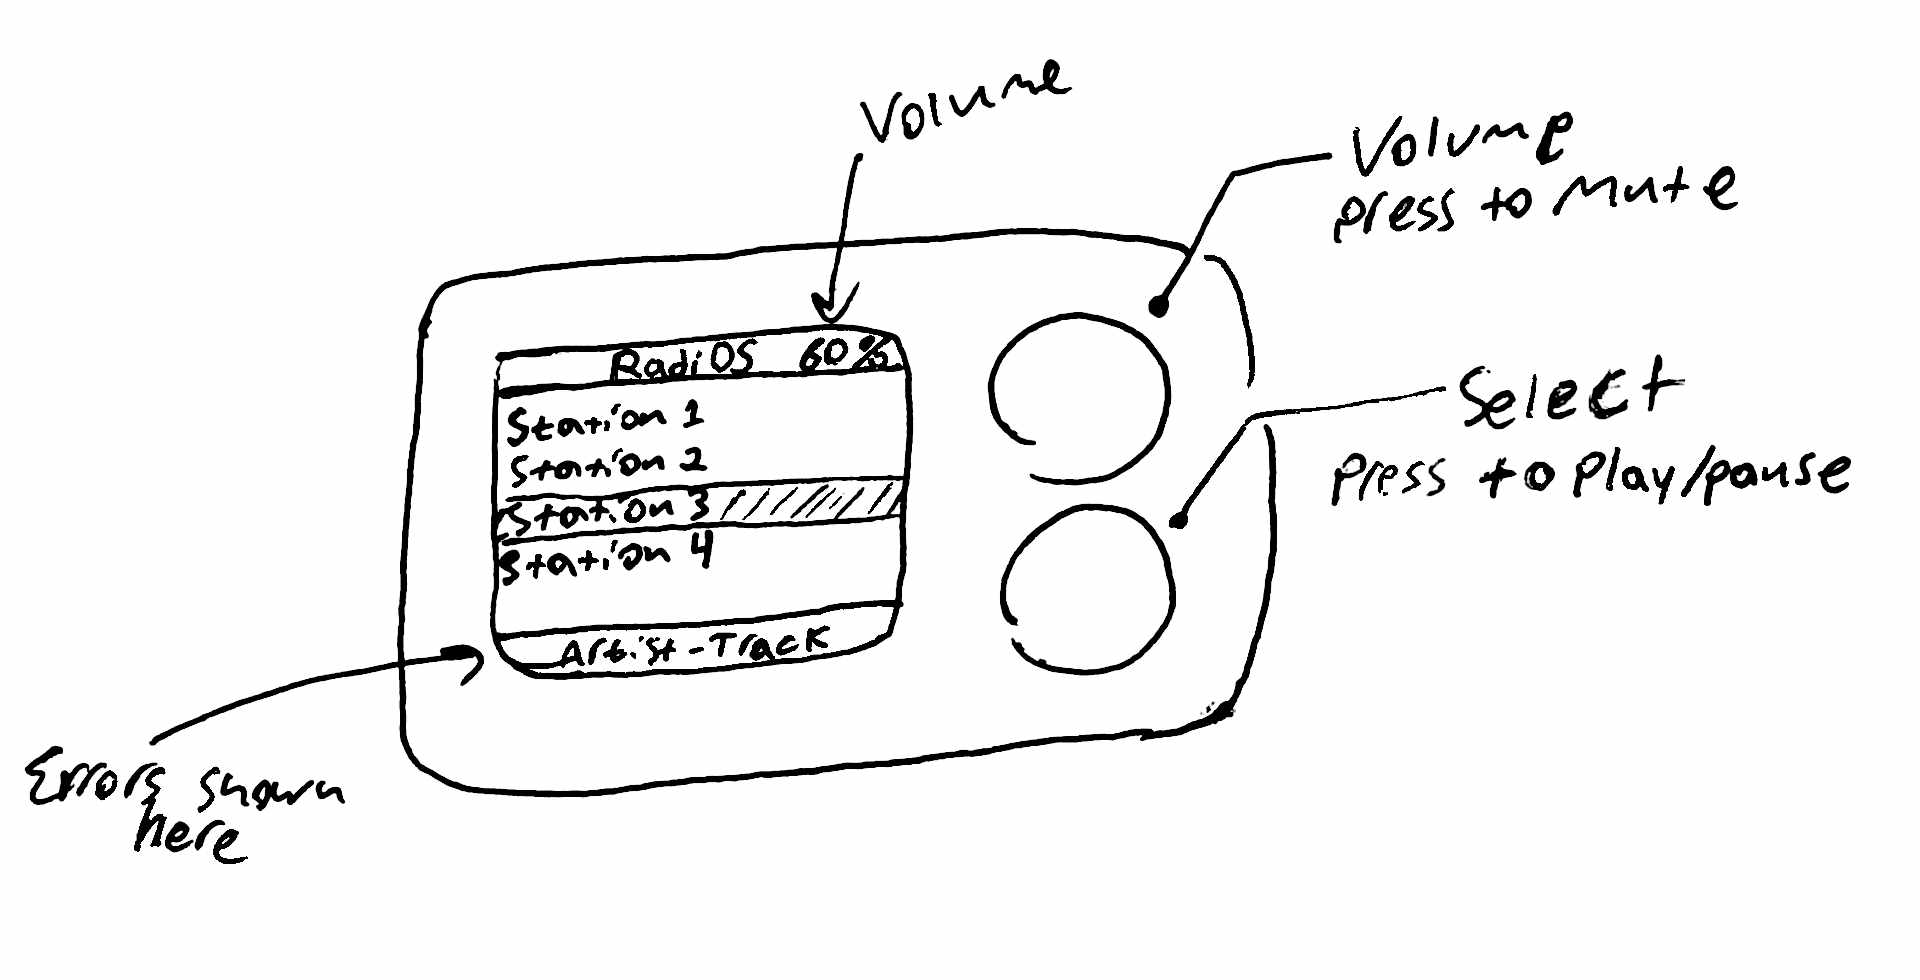 Sketch of the simple radio user interface 